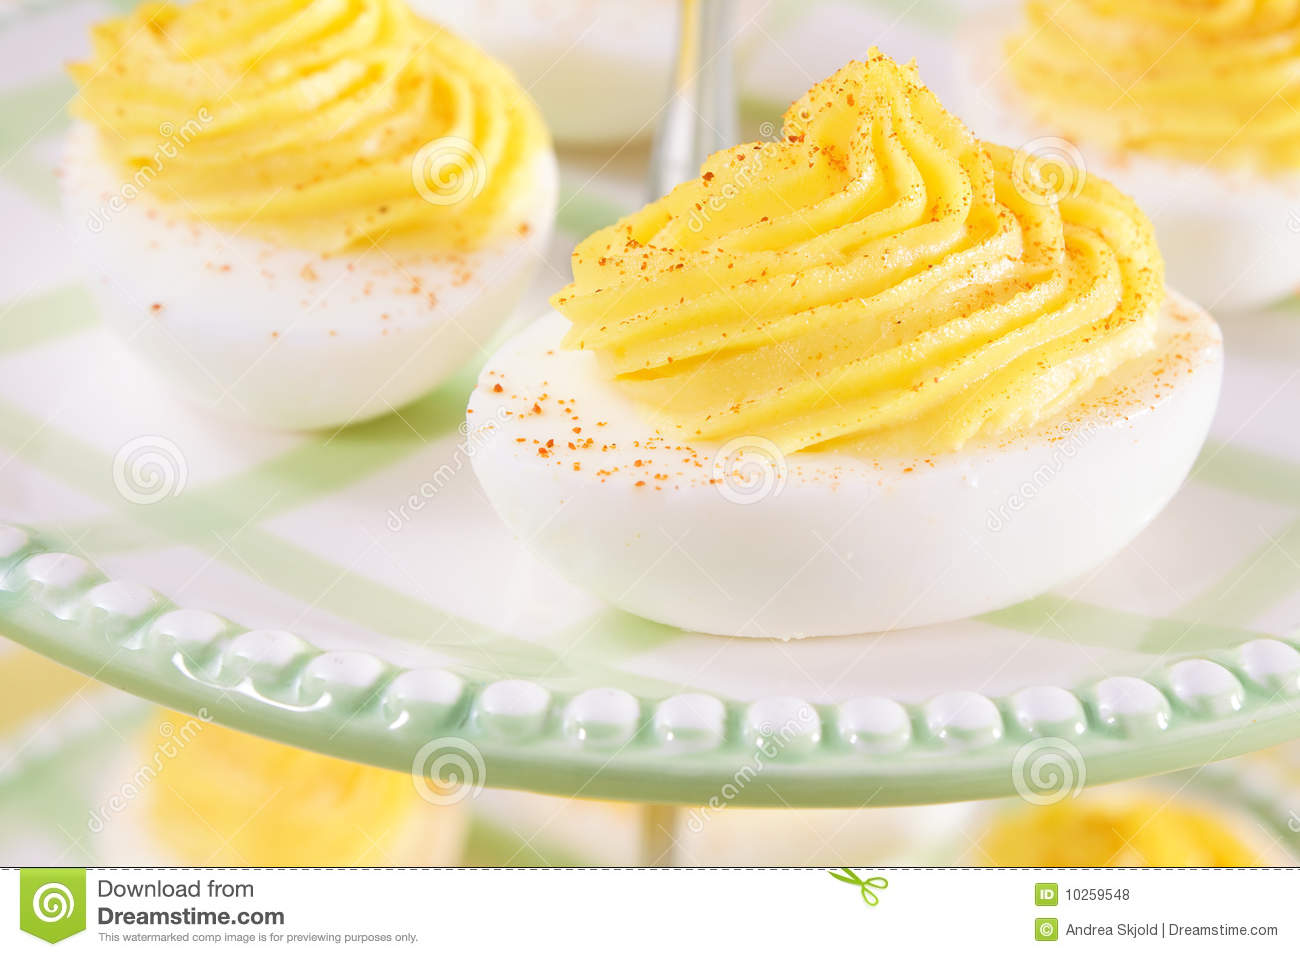 Deviled Eggs Sprinkled With Paprika   A Favorite Party Appetizer